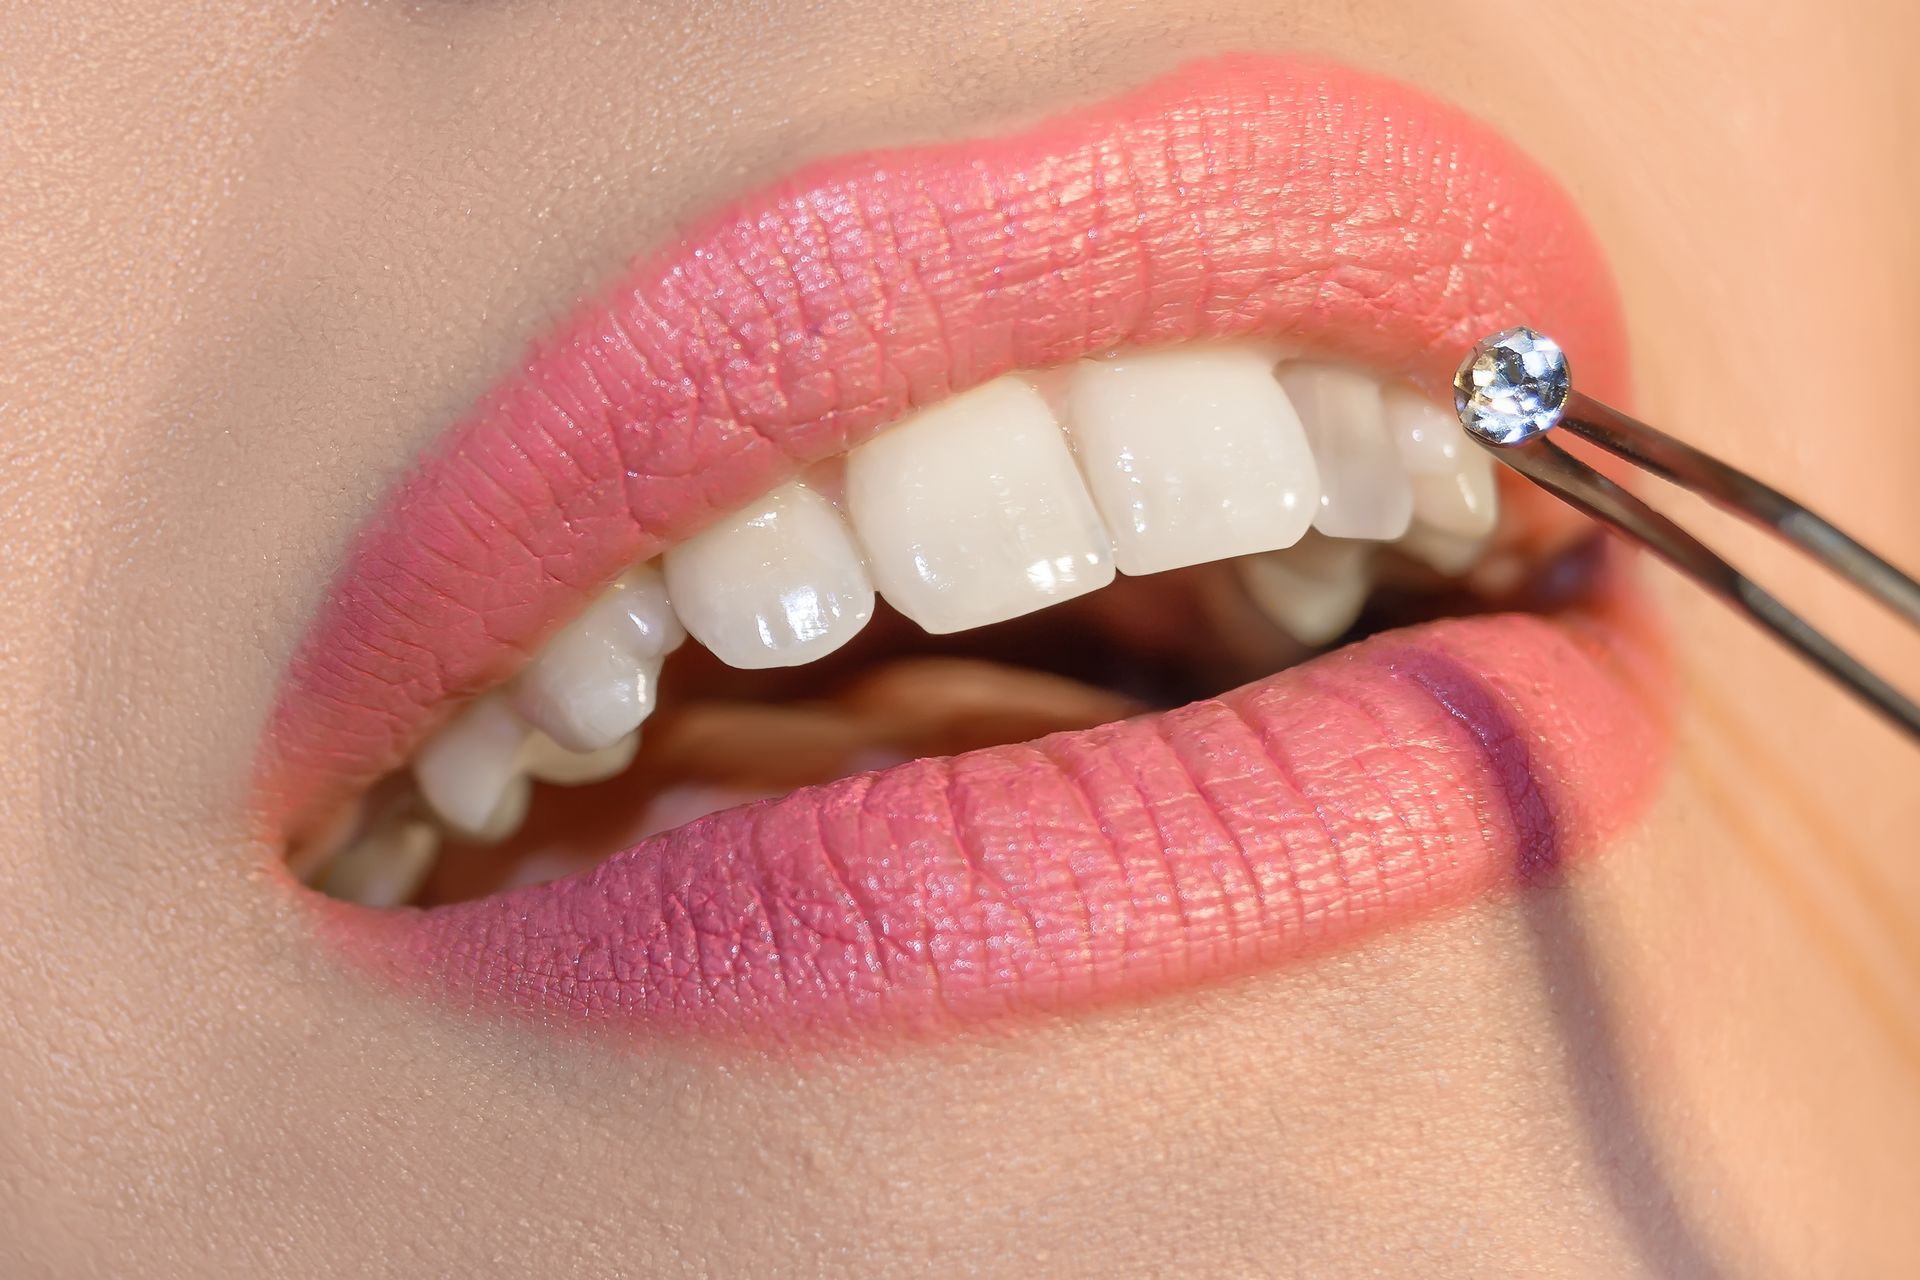 a woman with pink lips has a diamond in her mouth